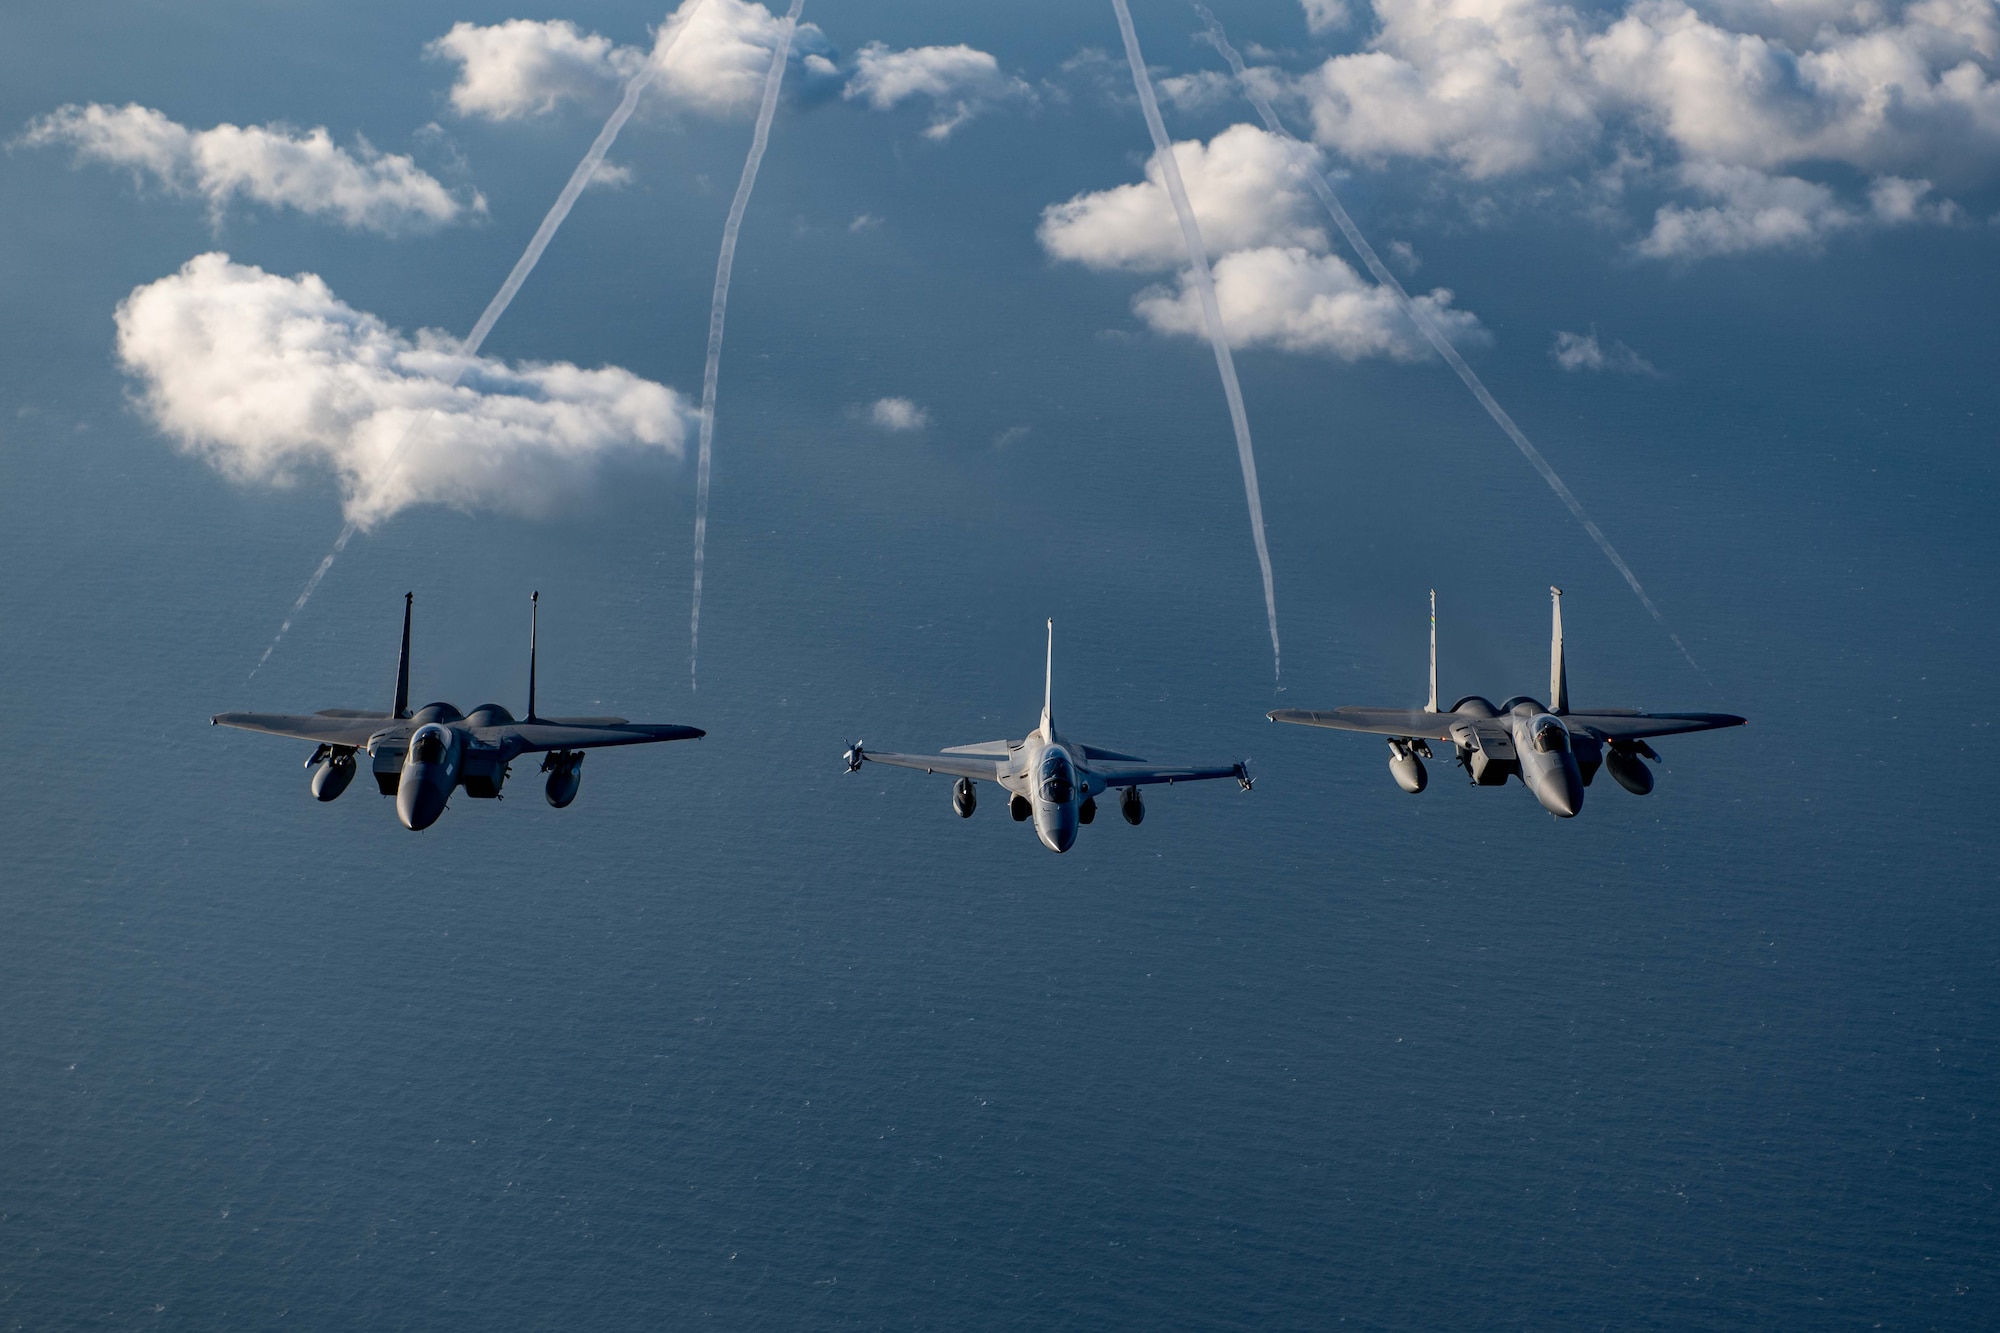 U.S. Air Force F-15s and Philippine Air Force FA-50s fly in formation in the vicinity of the South China Sea in support of a three-day maritime and aerial cooperation activity, Nov. 21-23. The maritime and aerial cooperation activity demonstrates the Armed Forces of the Philippines and U.S. Indo-Pacific Command’s commitment to a free and open Indo-Pacific Region. U.S. forces routinely operate with Allies and partners in defense of the rules-based international order and will continue to do so to maintain peace and stability in the region. (U.S. Air Force photo by Airman 1st Class Alexis Redin)